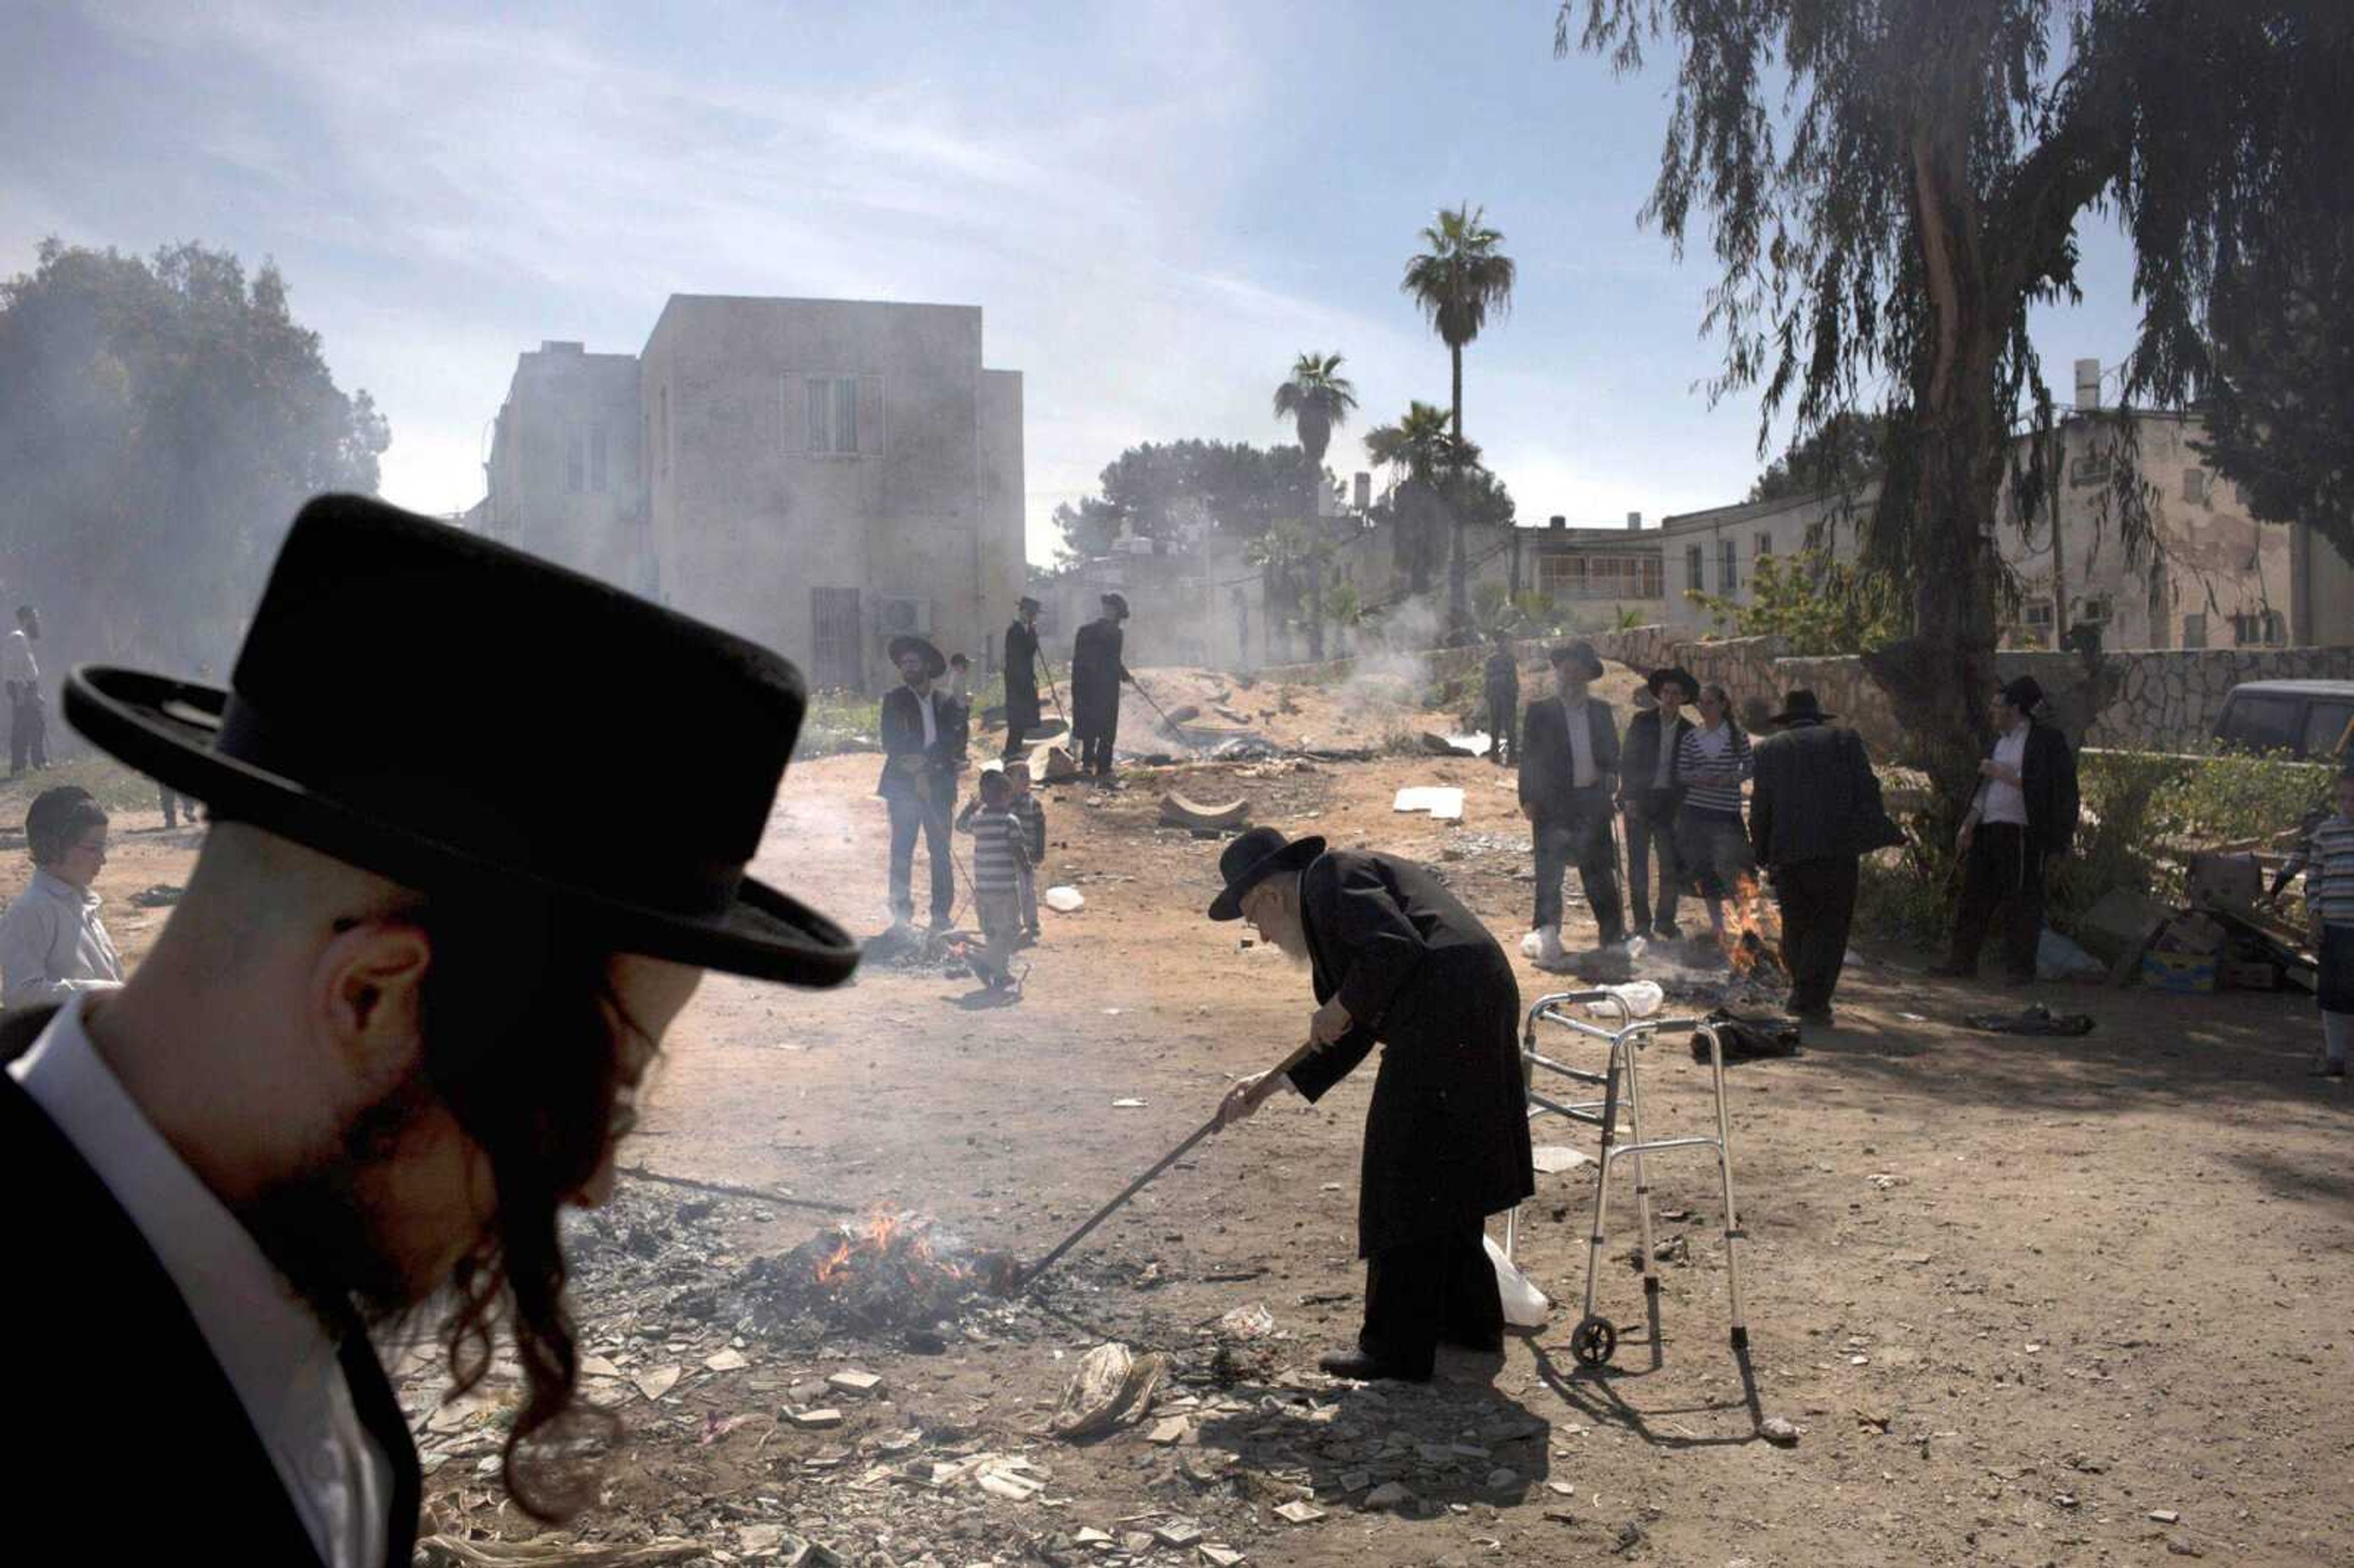 Ultra-Orthodox Jewish men burn leavened items in final preparation for the Passover holiday Monday in the ultra-Orthodox Jewish town of Bnei Brak, near Tel Aviv, Israel. Jews are forbidden to eat leavened foodstuffs during the Passover holiday that celebrates the biblical story of the Israelites&#8217; escape from slavery and exodus from Egypt. (Oded Balilty ~ Associated Press)